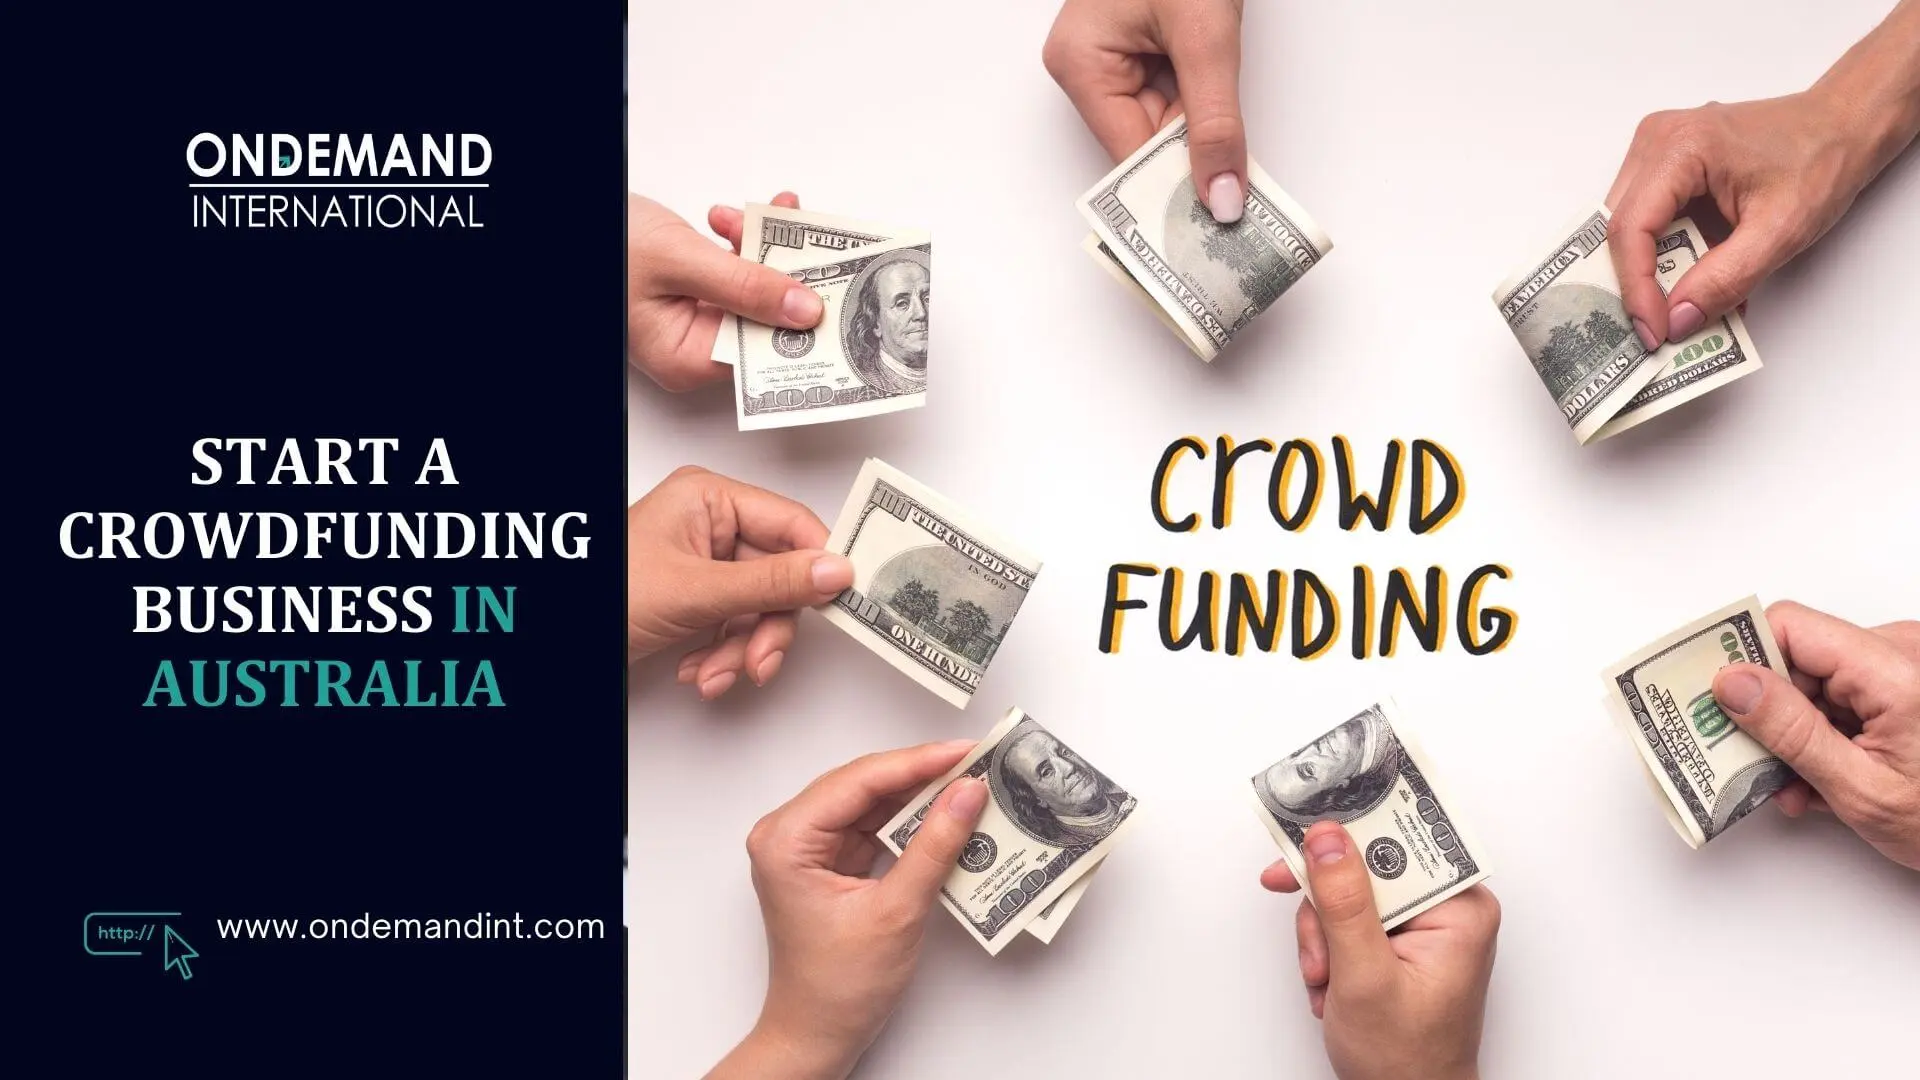 set up a crowdfunding business in australia